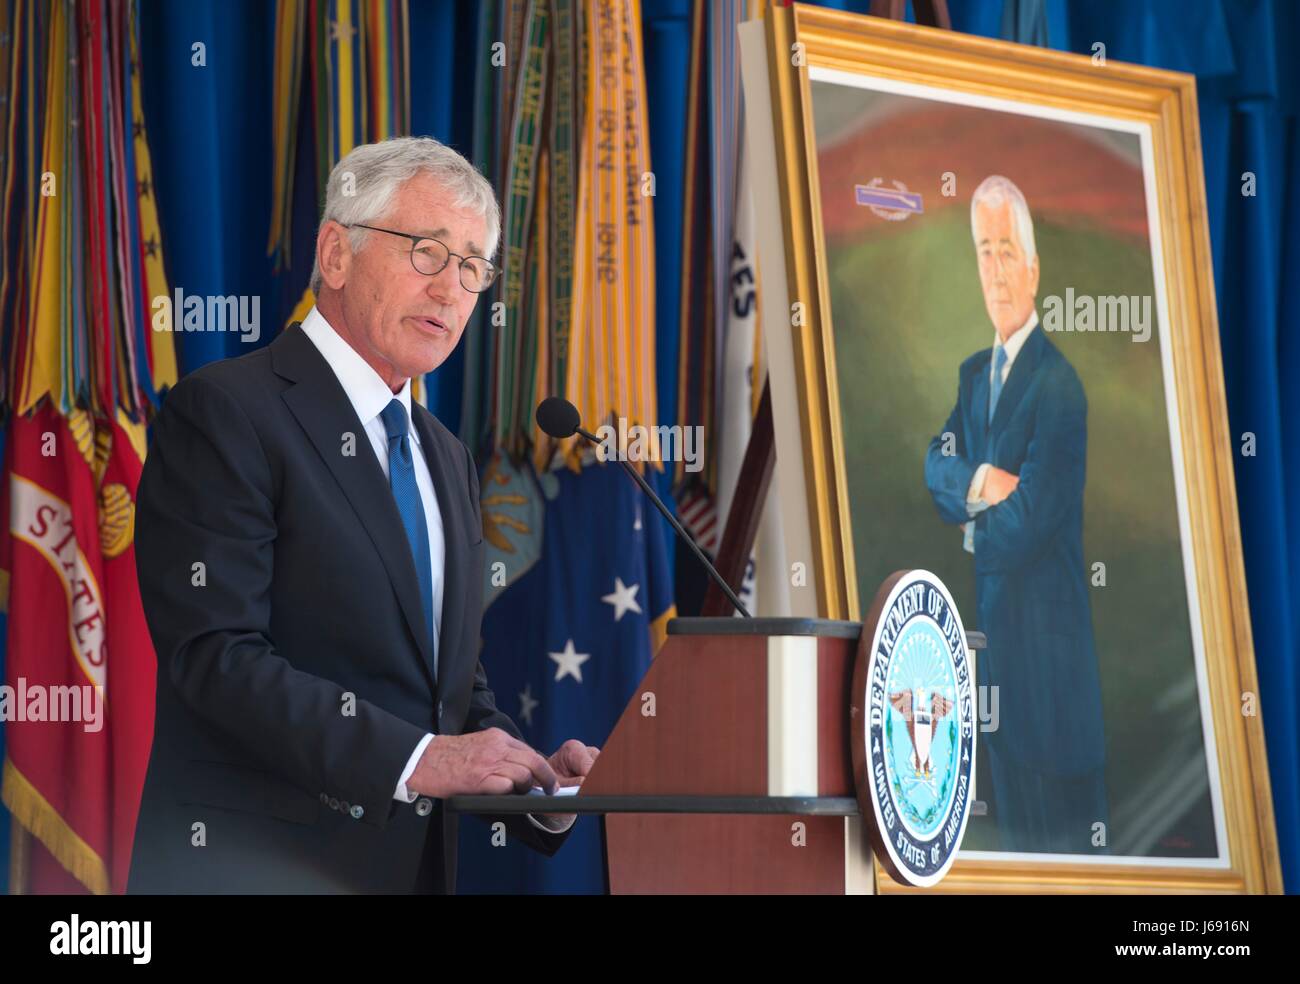 Former Secretary of Defense Chuck Hagel speaks during the unveiling ceremony for his official portrait at the Pentagon May 19, 2017 in Arlington, Virginia. Hagel served as the 24th Secretary of Defense from February 2013 to February 2015.   (photo by Brigitte N. Brantley/DoD via Planetpix) Stock Photo